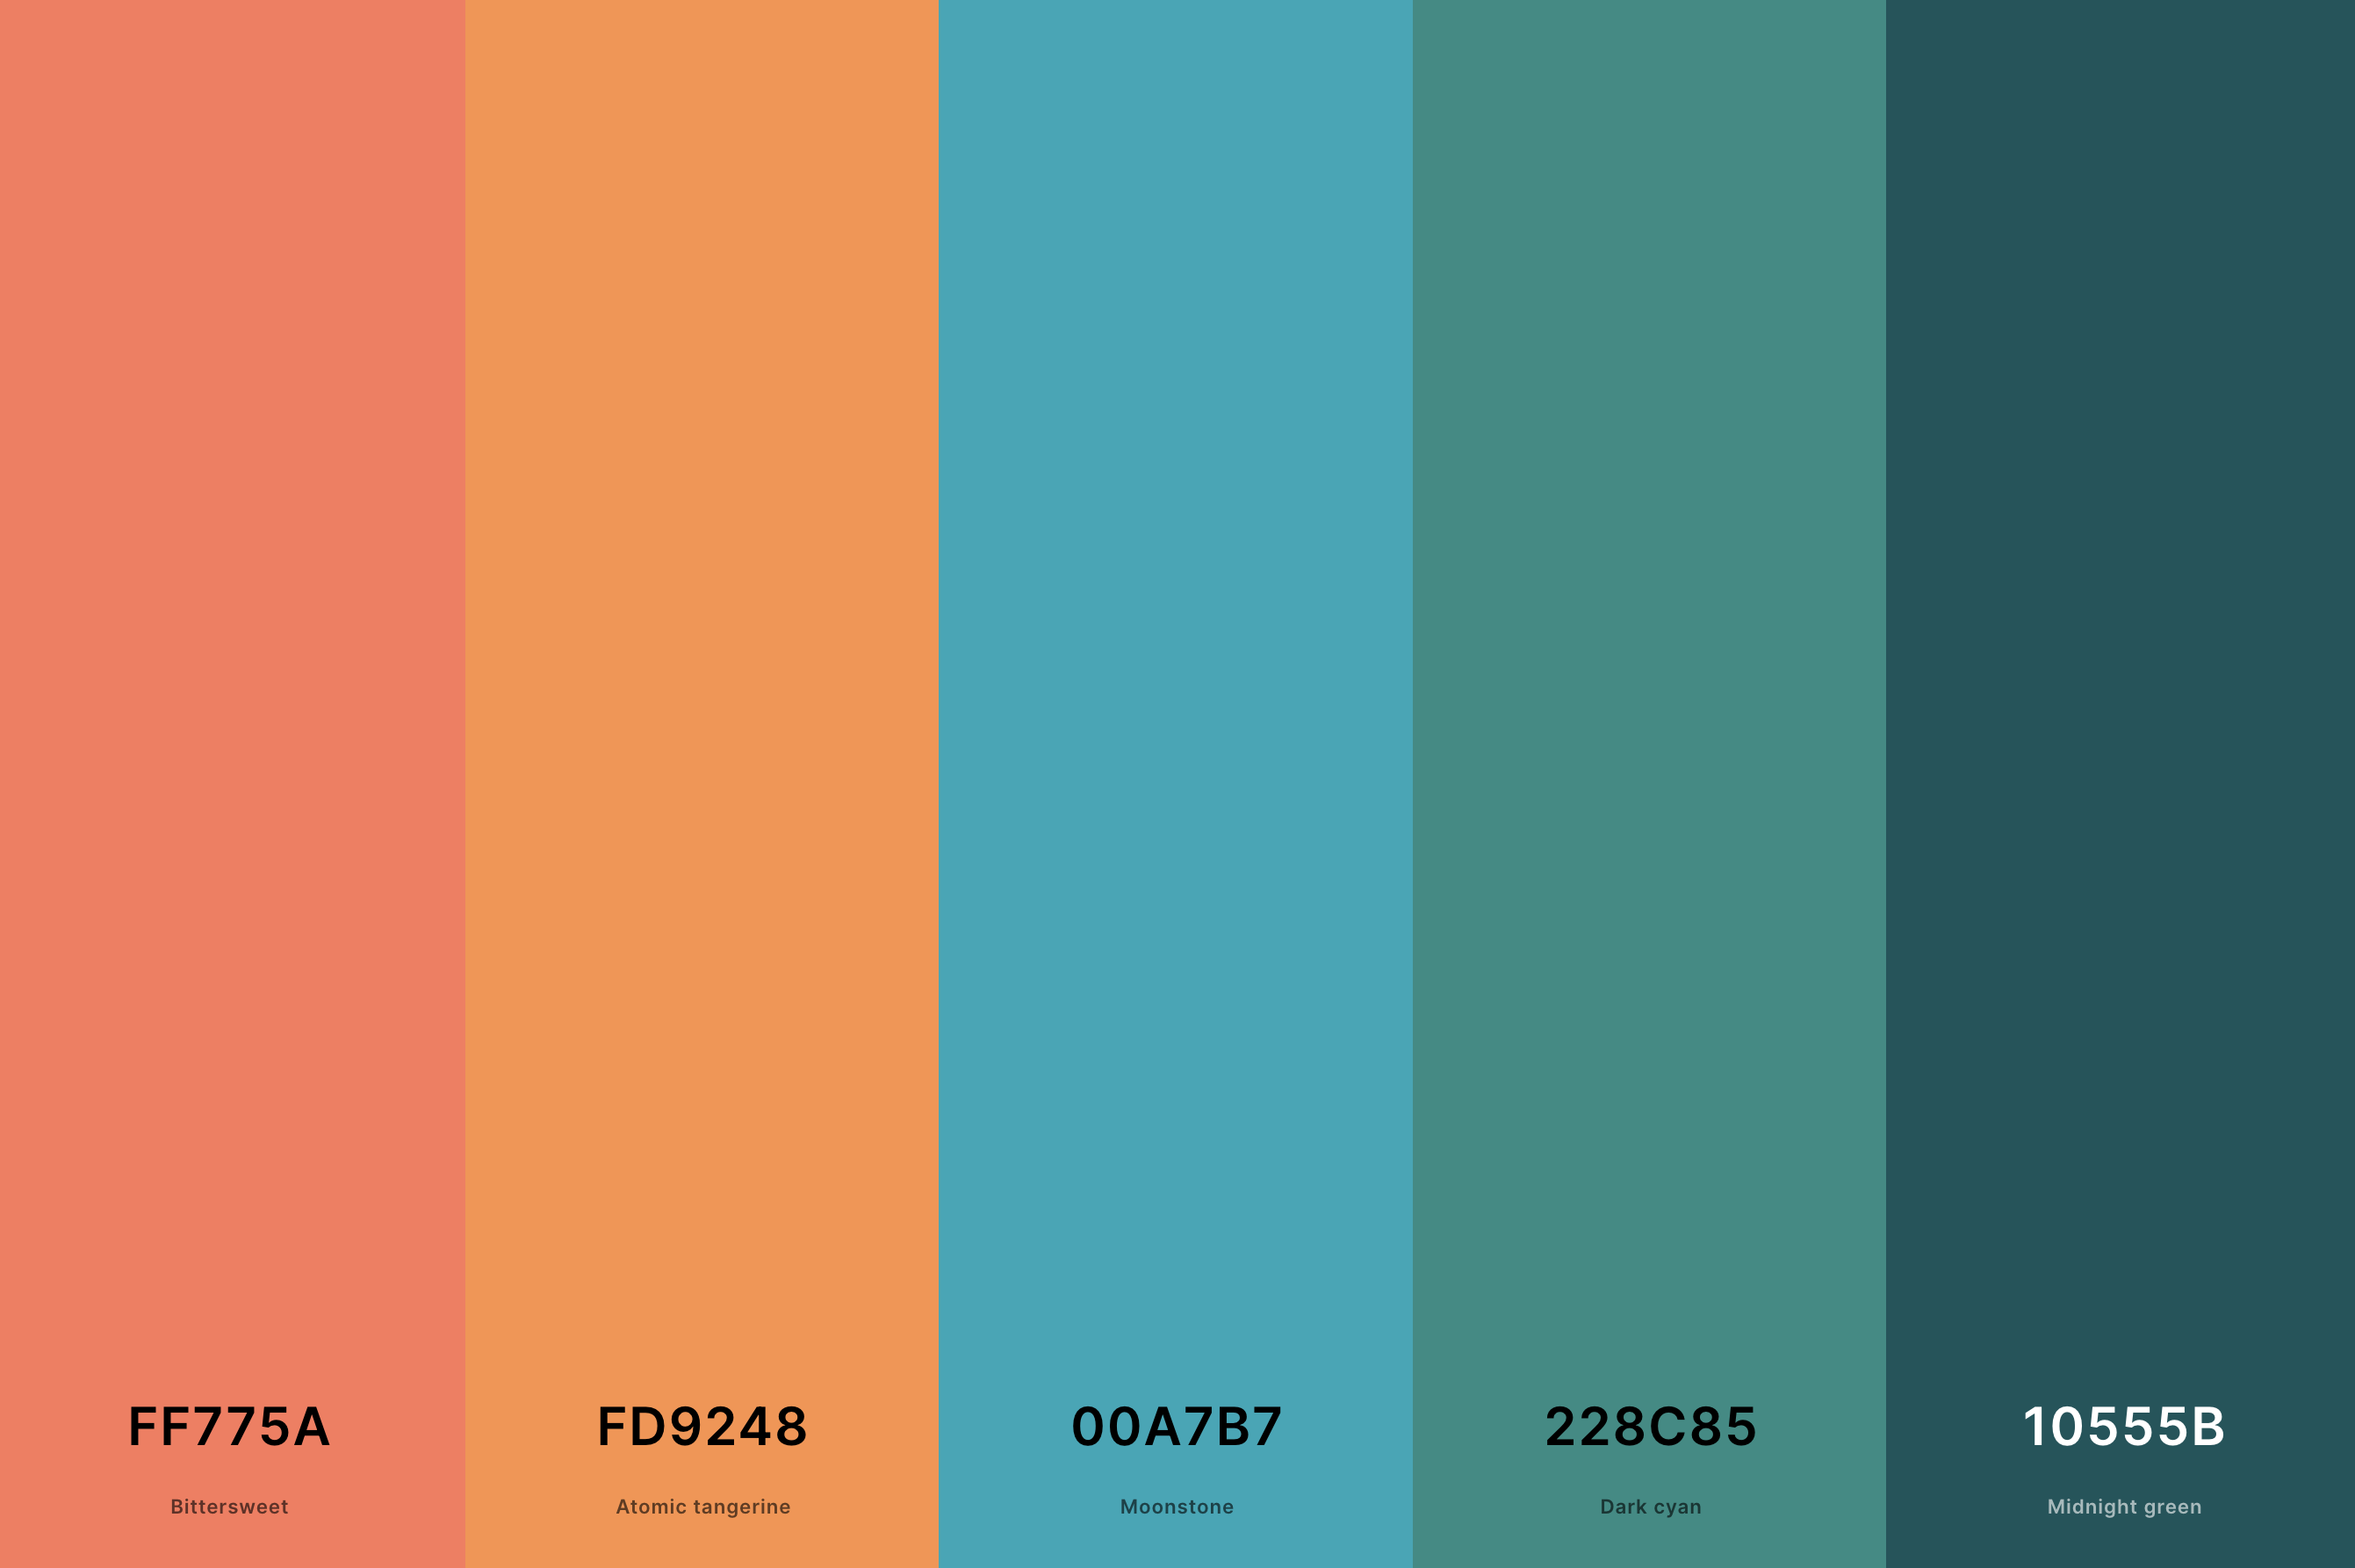 3. Ocean Sunset Color Palette Color Palette with Bittersweet (Hex #FF775A) + Atomic Tangerine (Hex #FD9248) + Moonstone (Hex #00A7B7) + Dark Cyan (Hex #228C85) + Midnight Green (Hex #10555B) Color Palette with Hex Codes